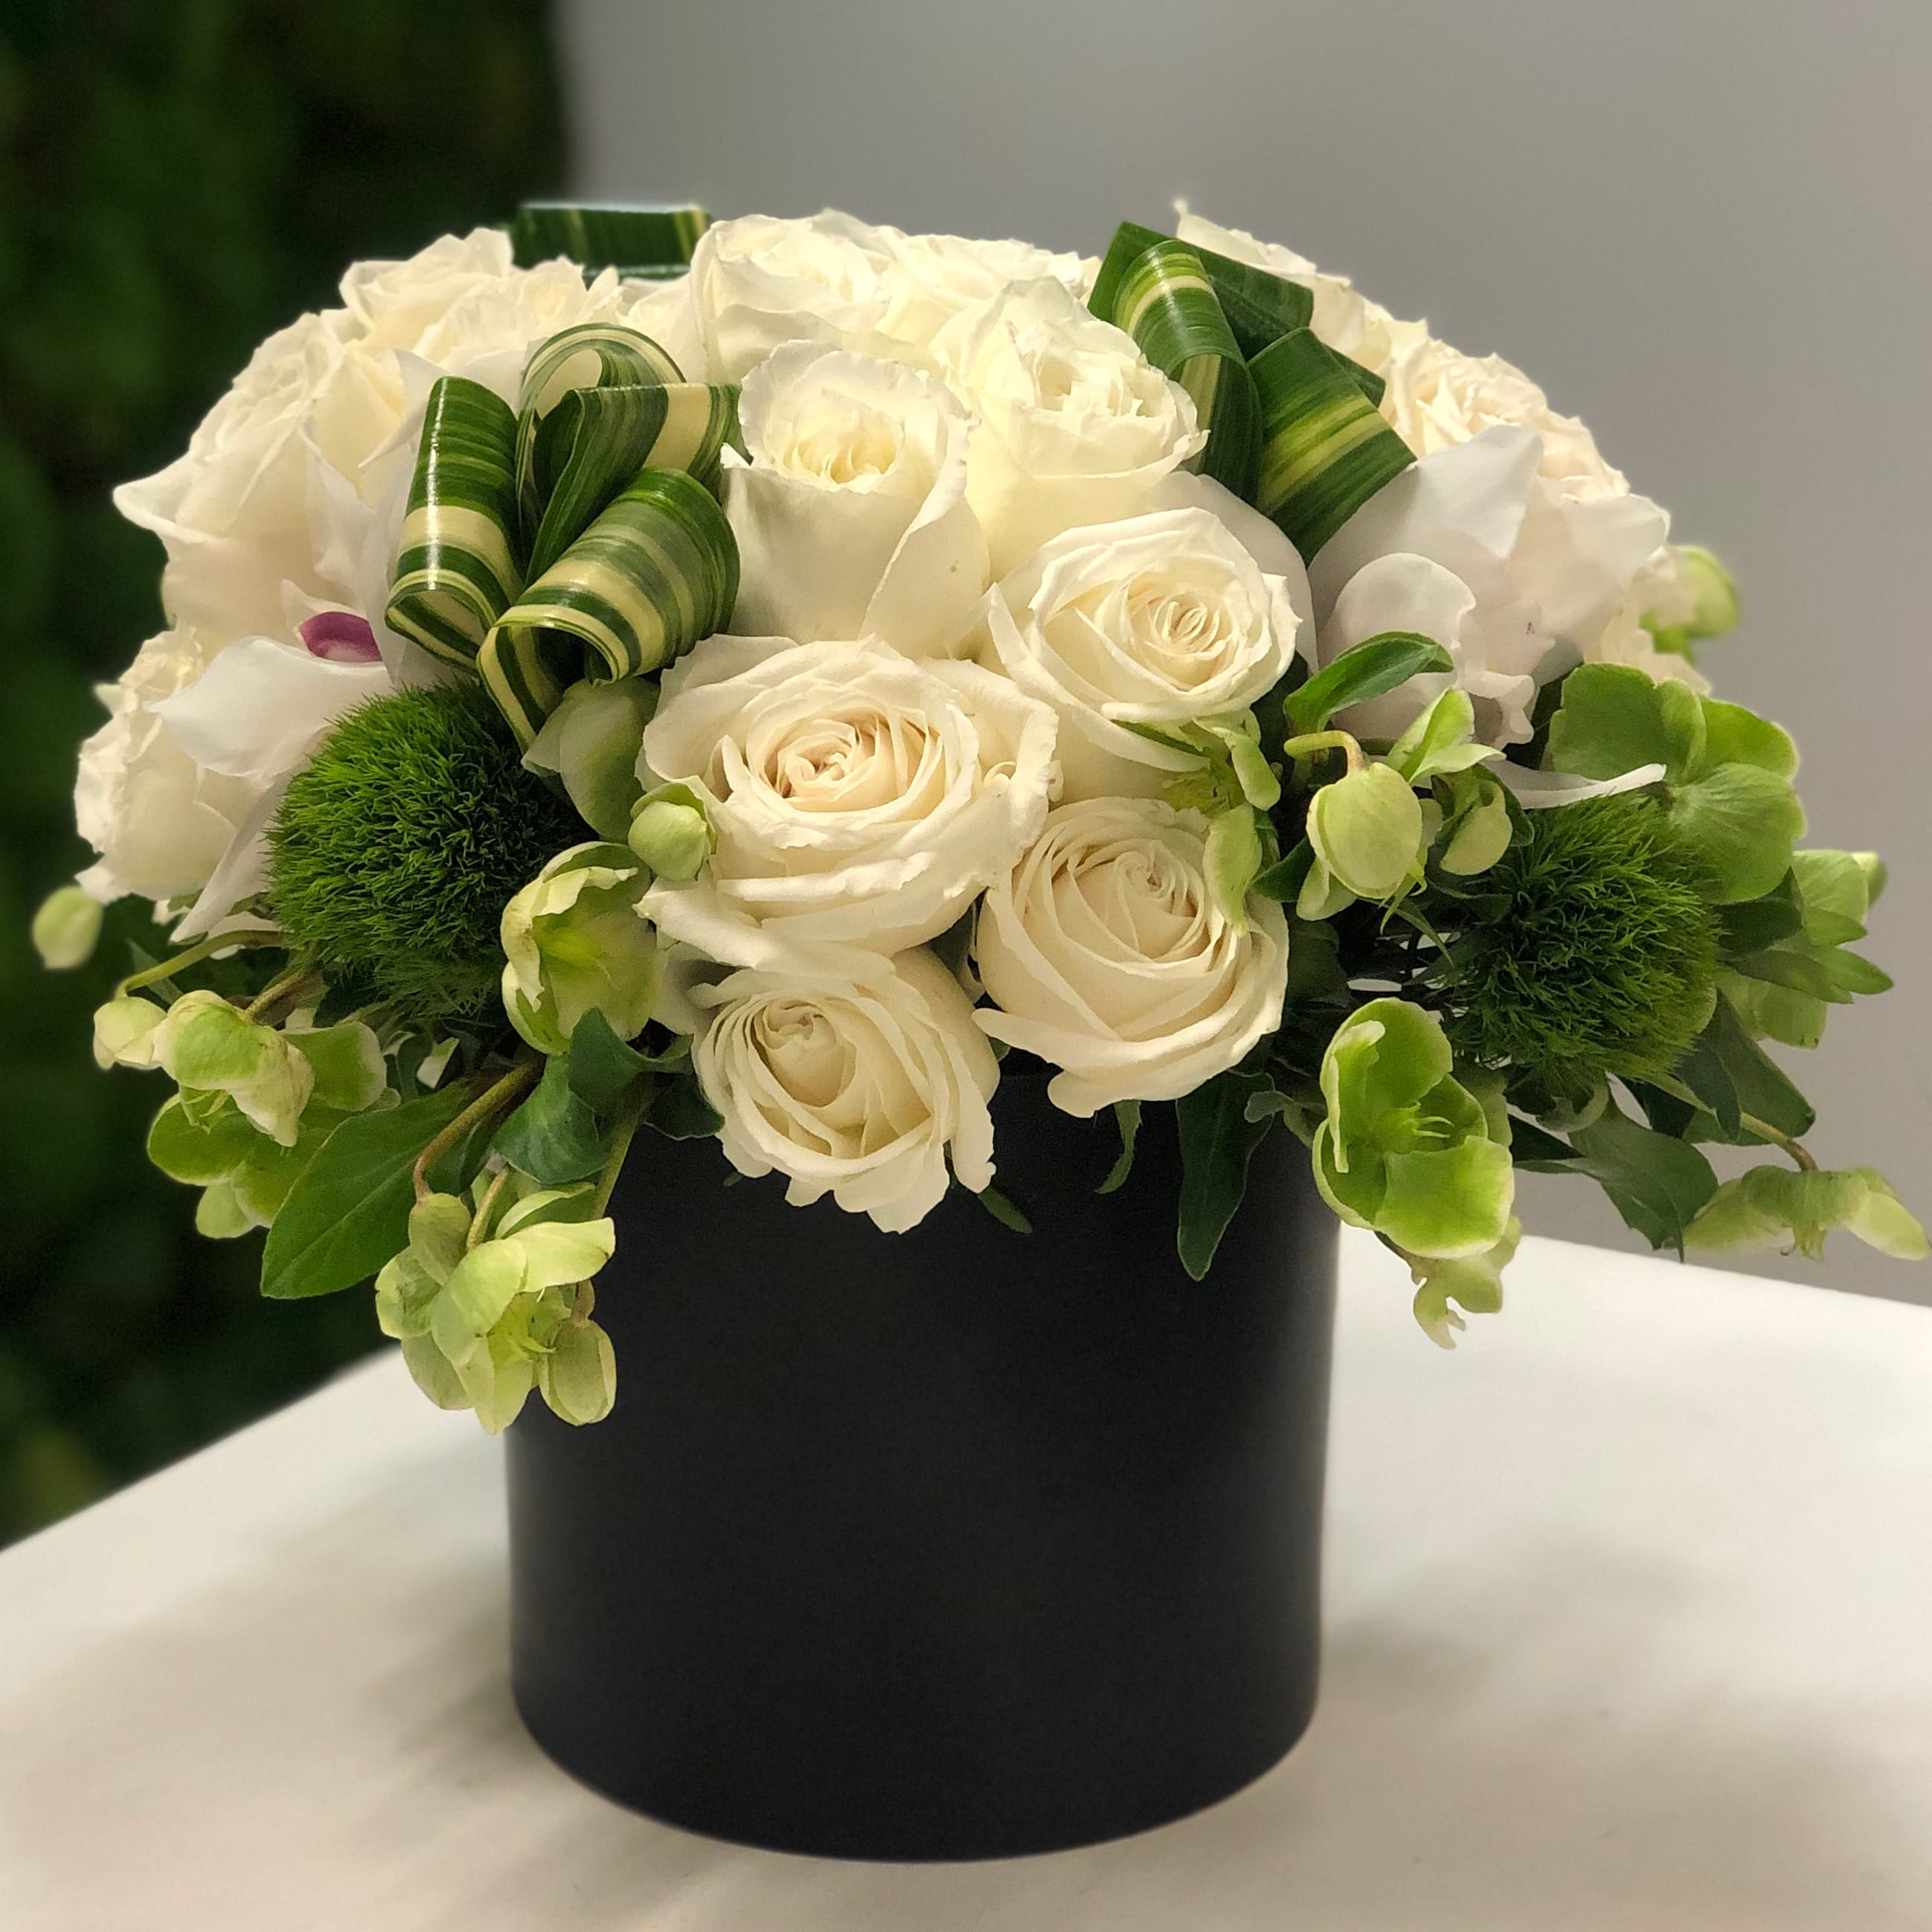 Black Matte Garden - Mixed bouquet of white roses, white orchids, hellebores, green moss and variegated aspidistra leaves arranged in a black matte ceramic 6&quot; vase. Overall arrangement height is about 12&quot;